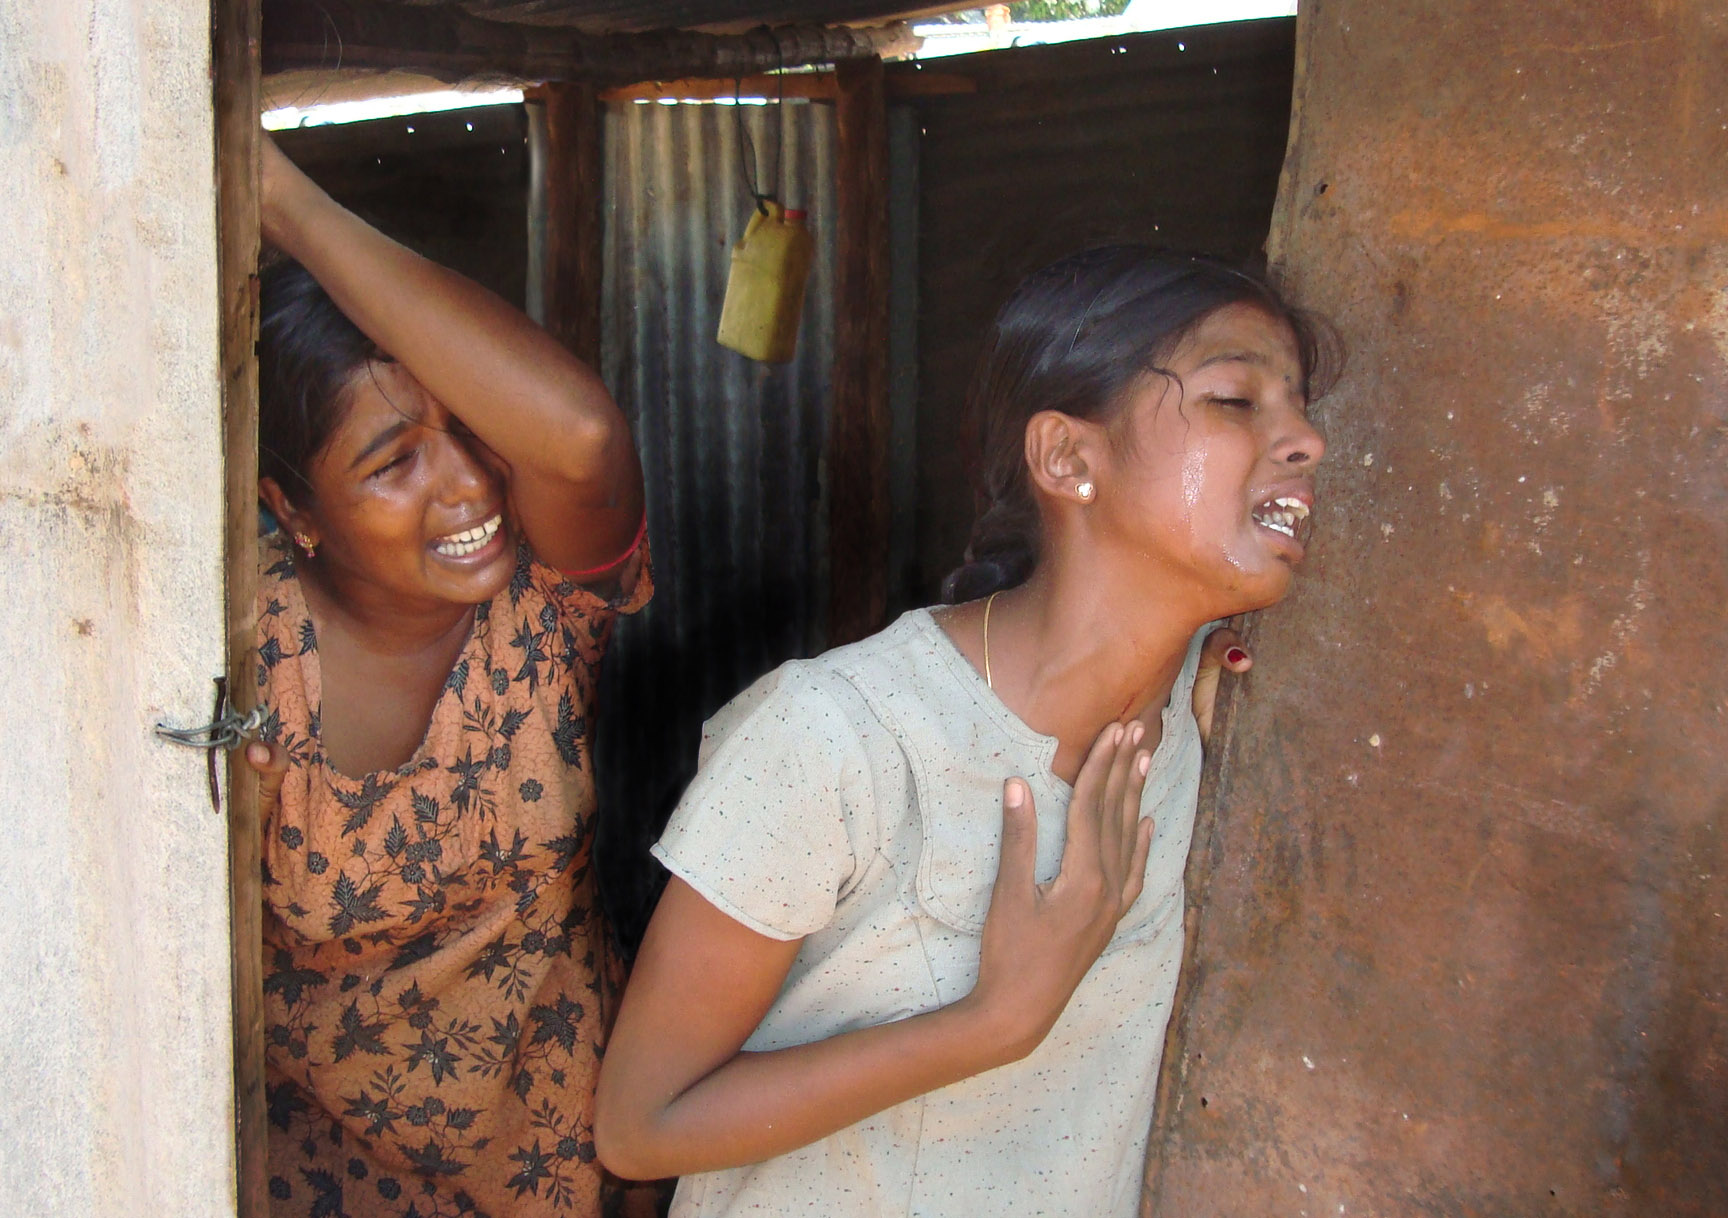 Sri Lanka Massacred Tens of Thousands of Tamils While the World Looked Away Pulitzer Center